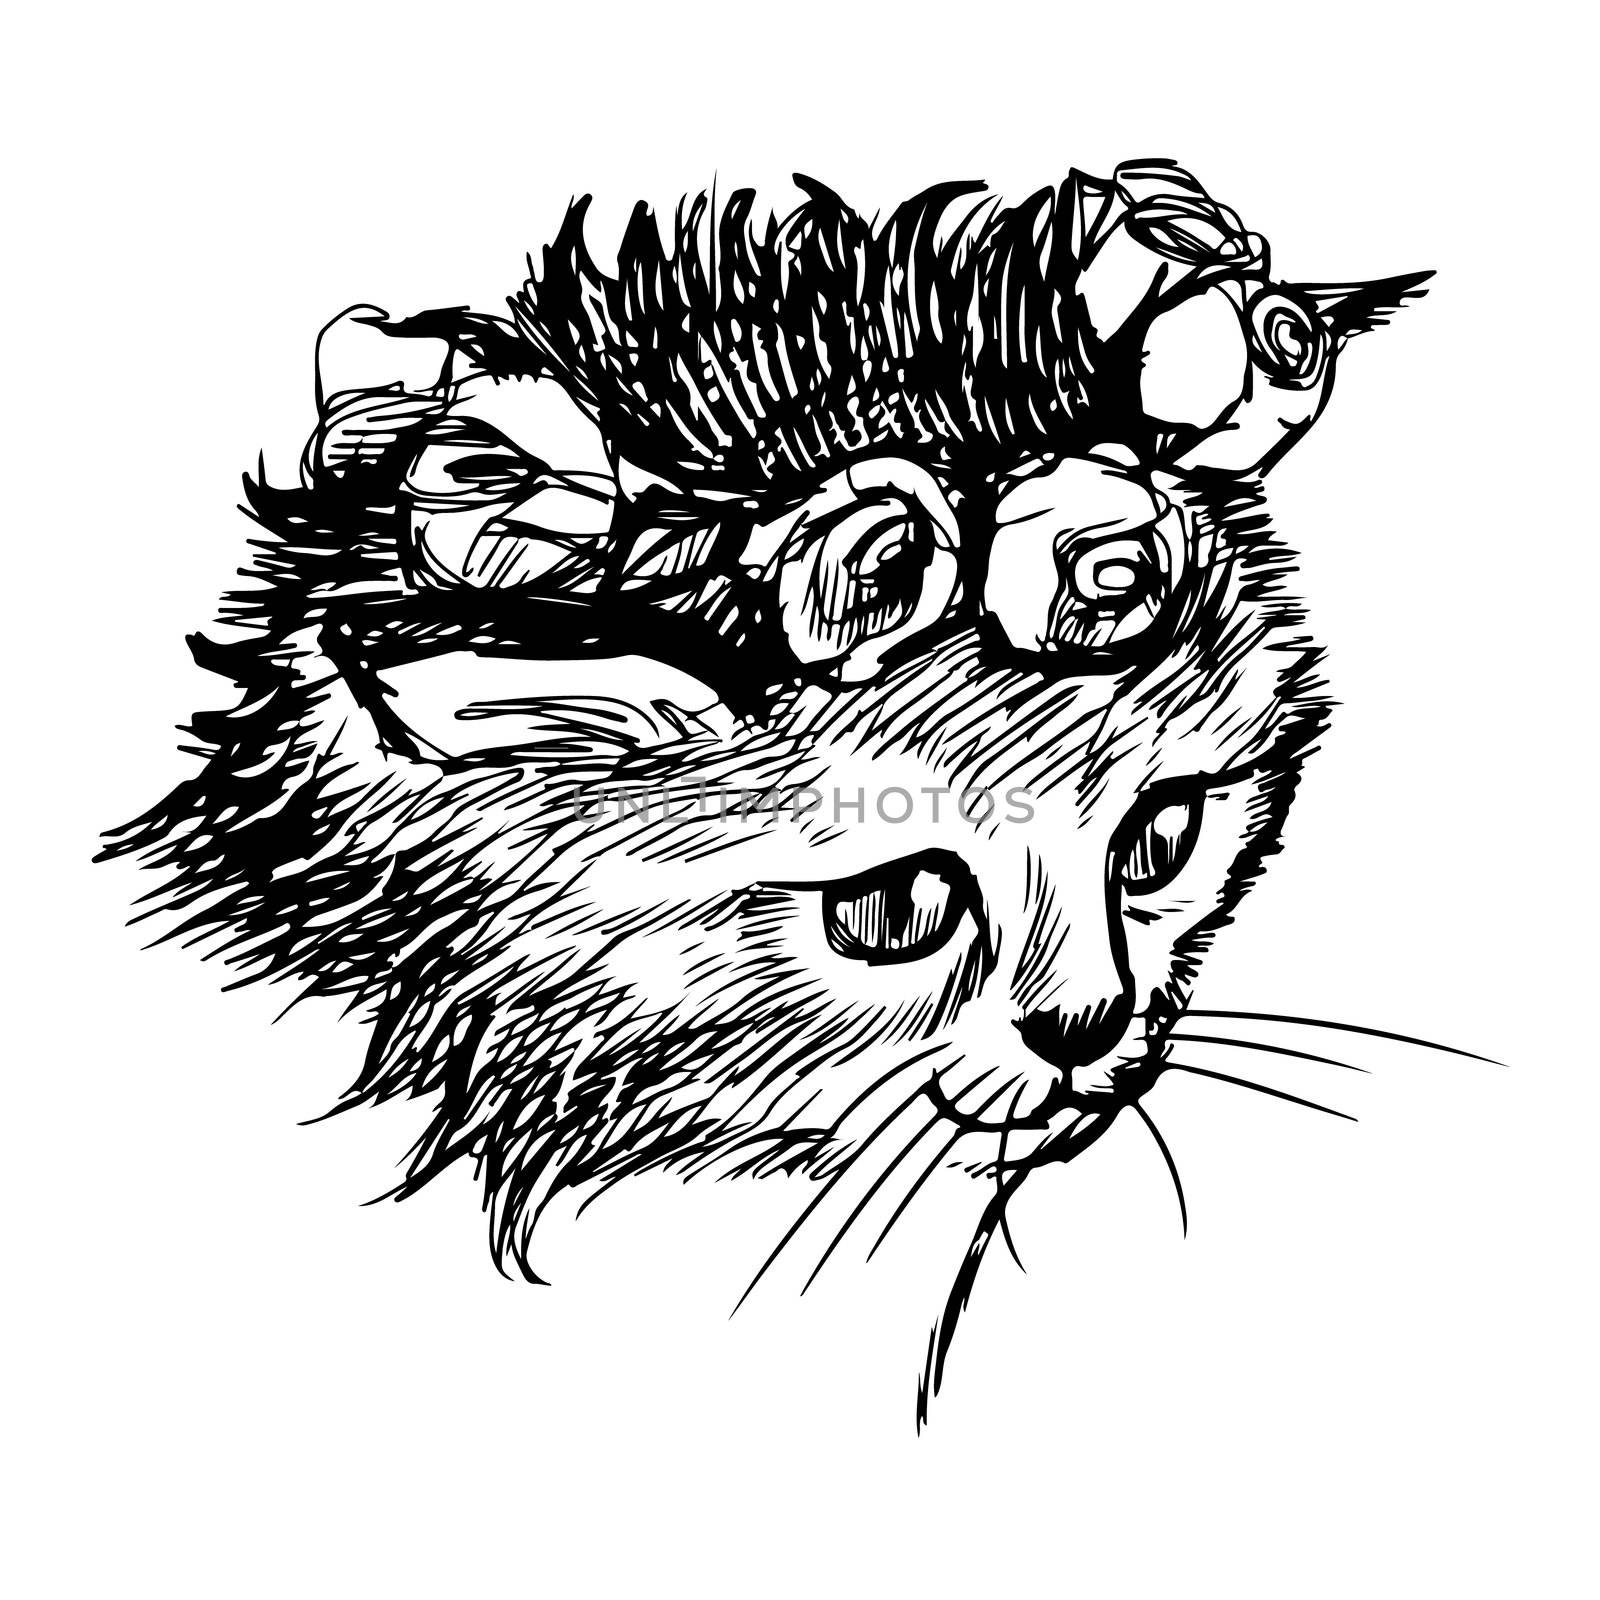 freehand sketch illustration of little cat, kitten by simpleBE